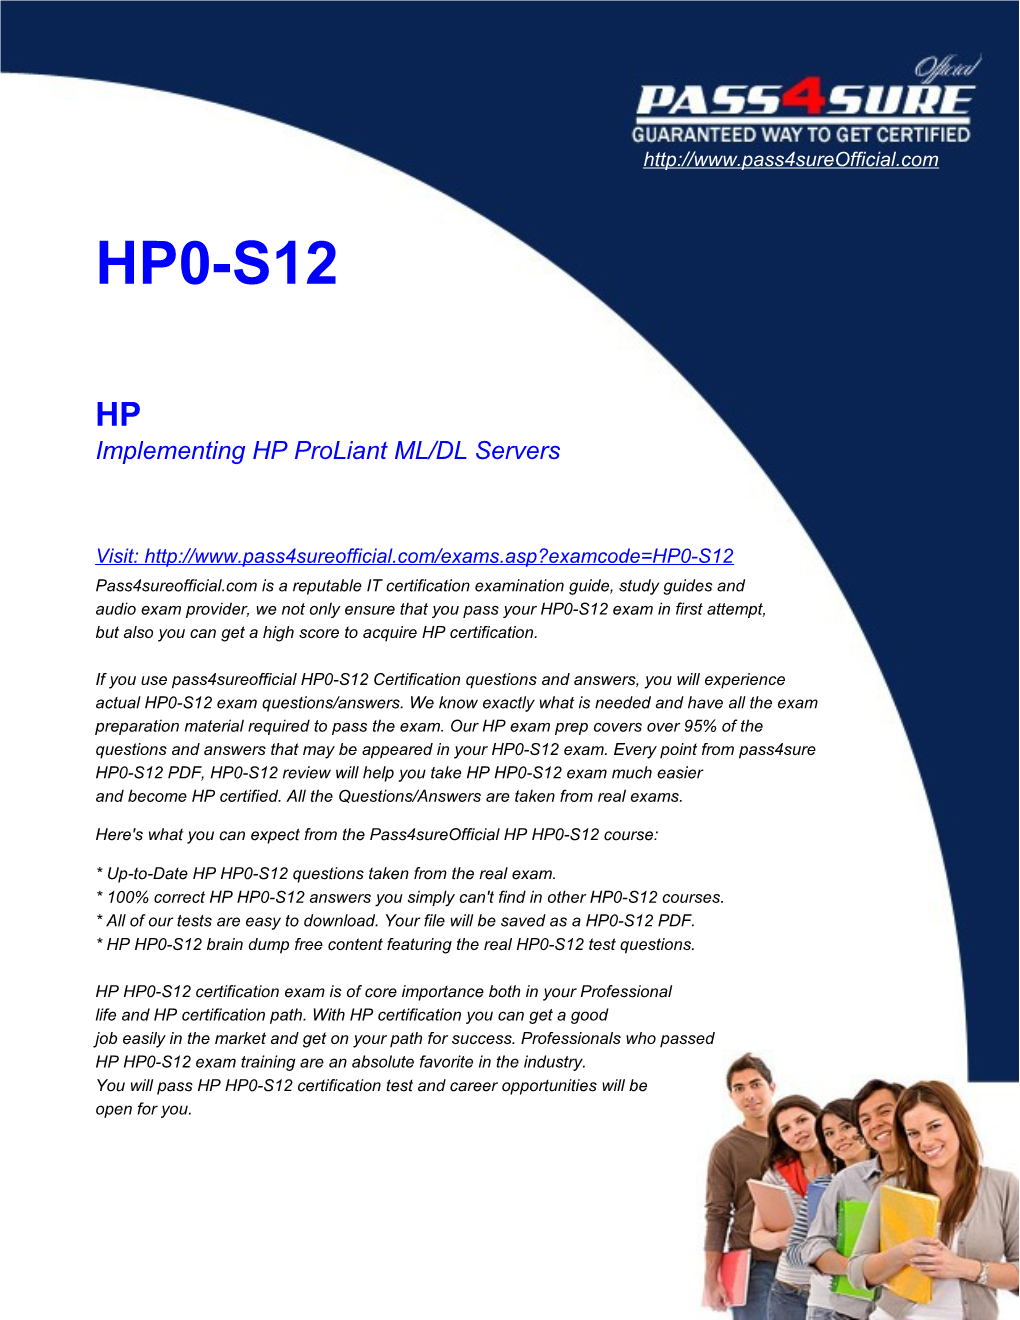 Implementing HP Proliant ML/DL Servers